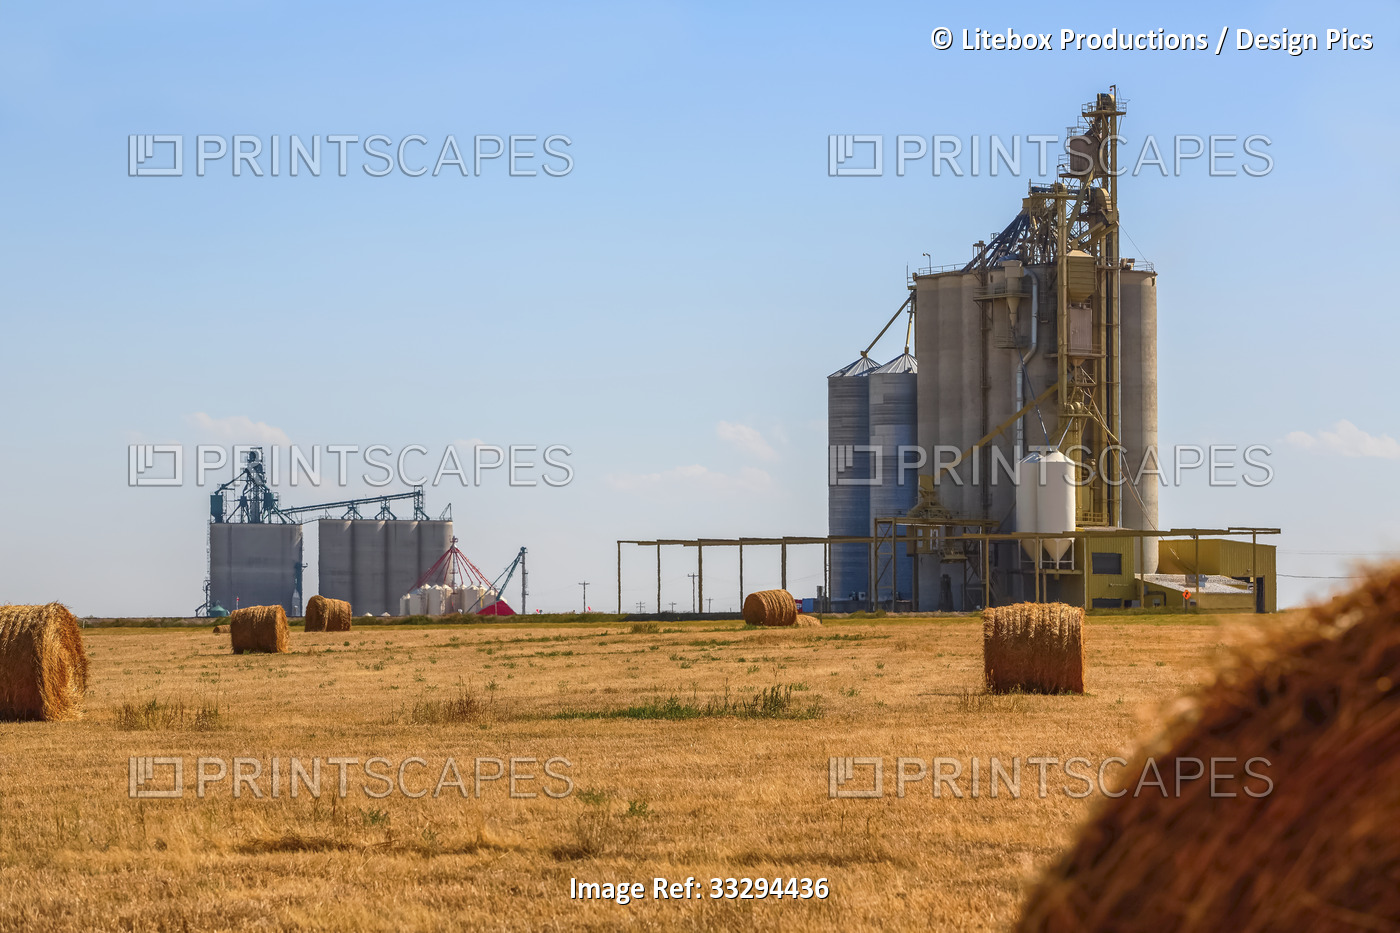 Rolled hay bales in field and automated grain terminal with silos and bins for ...